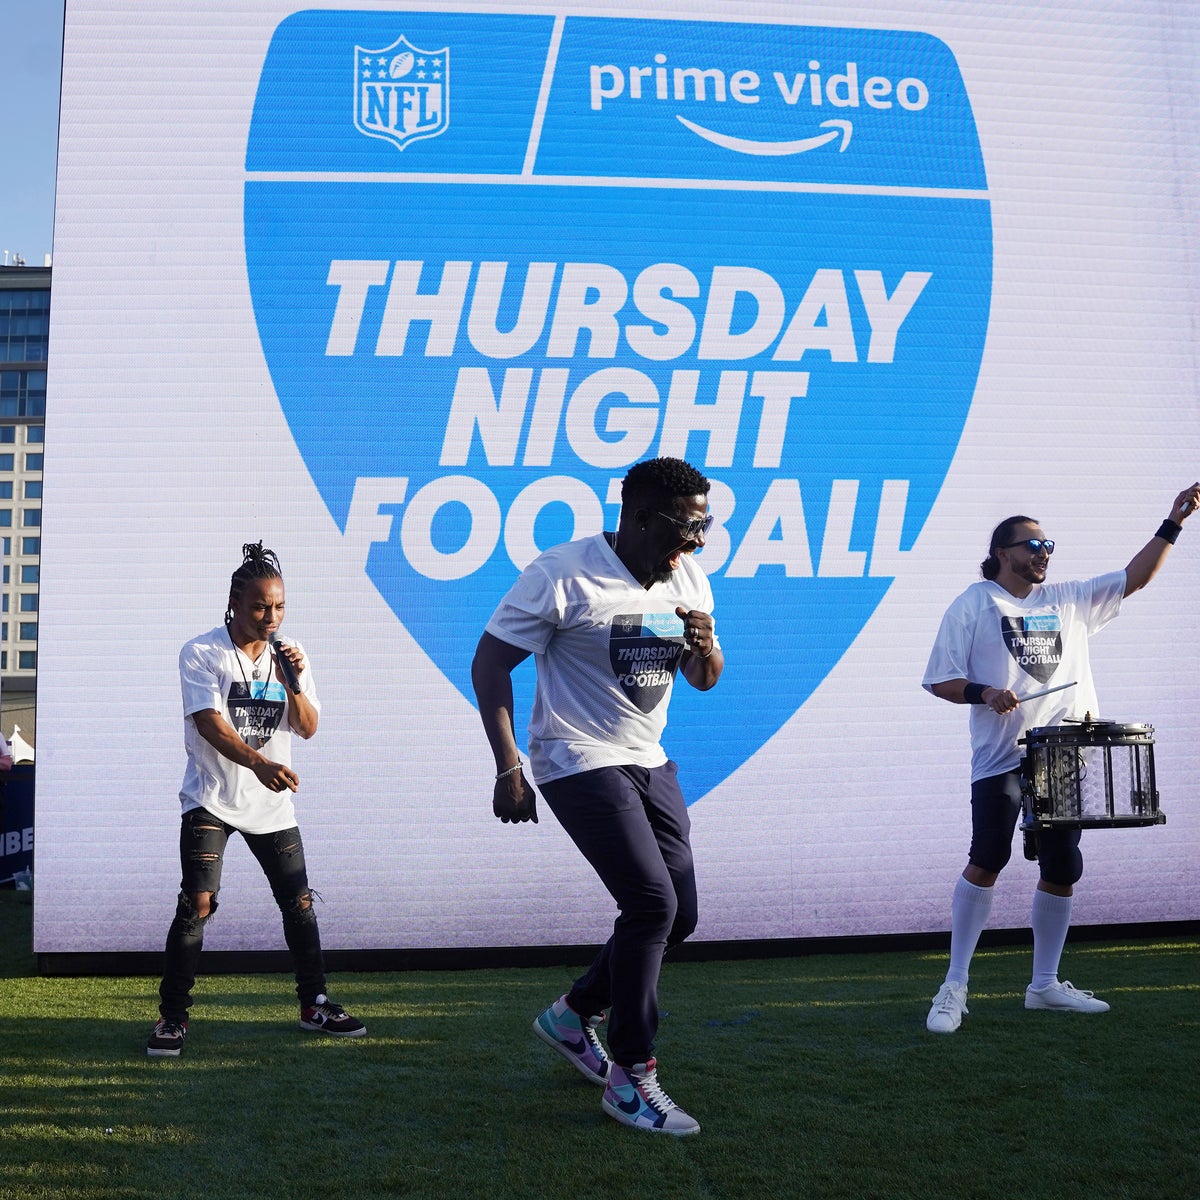 NFL on Prime Video latest foray by leagues into streaming